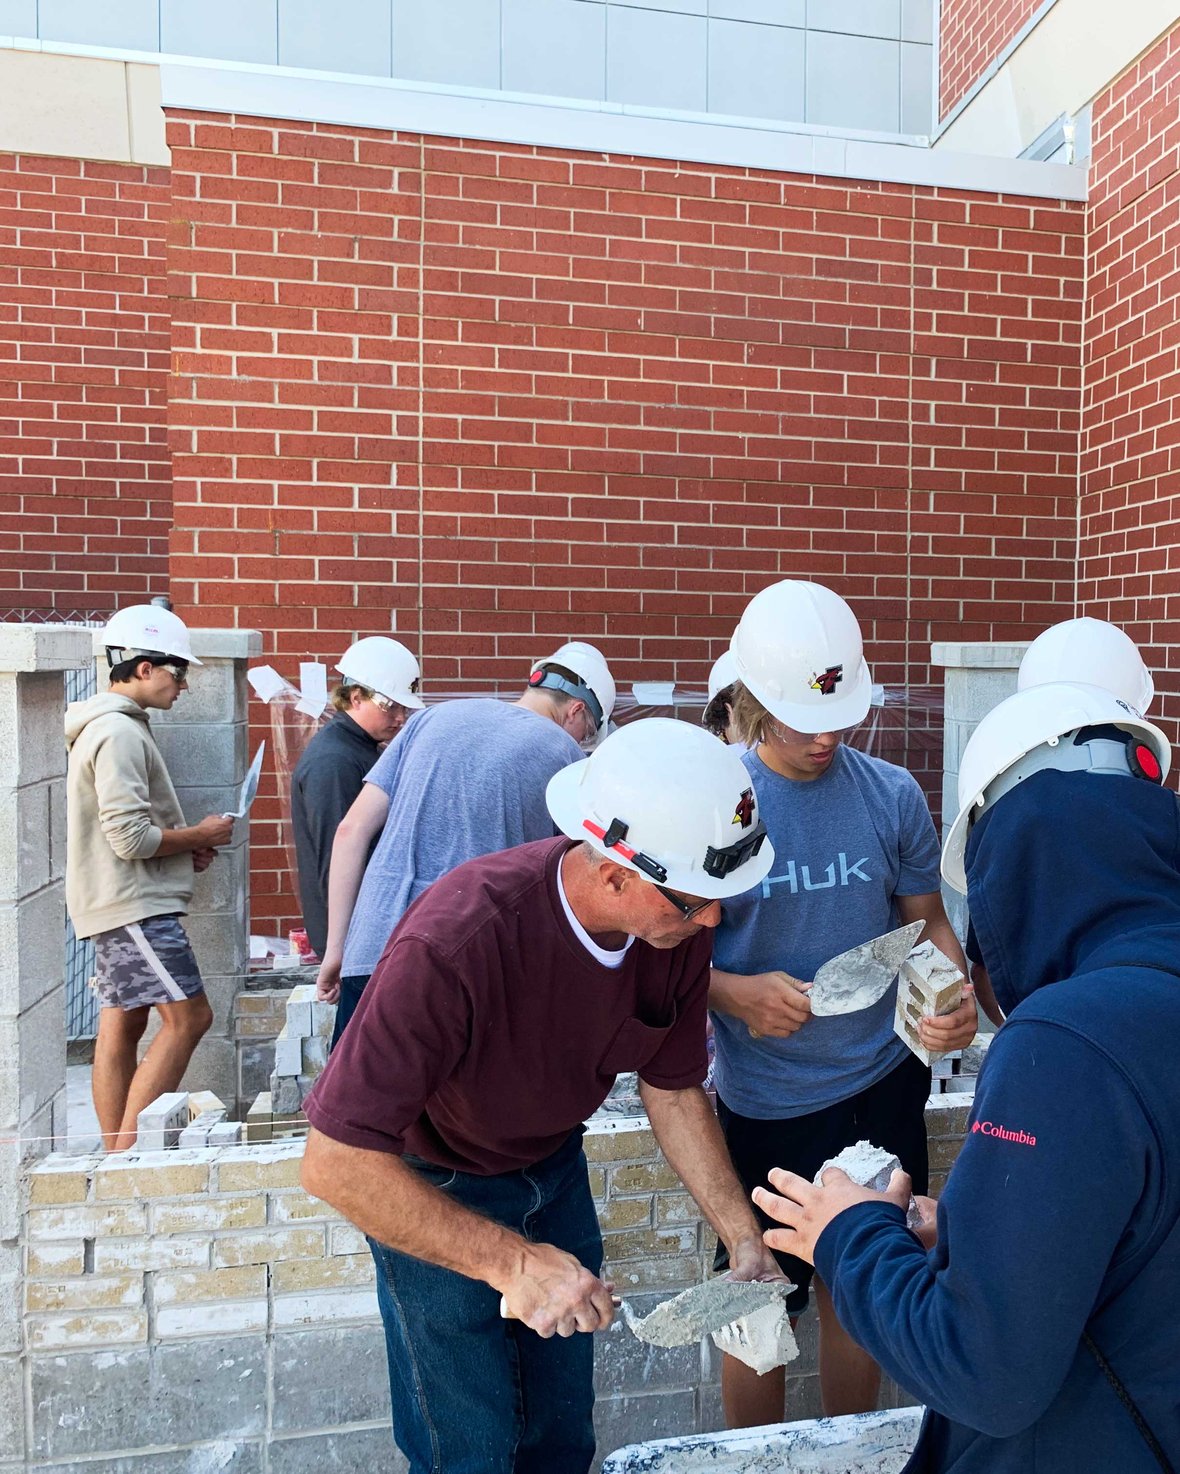 Fond du Lac Architecture Construction Engineering students working in a masonry construction practice are laying bricks